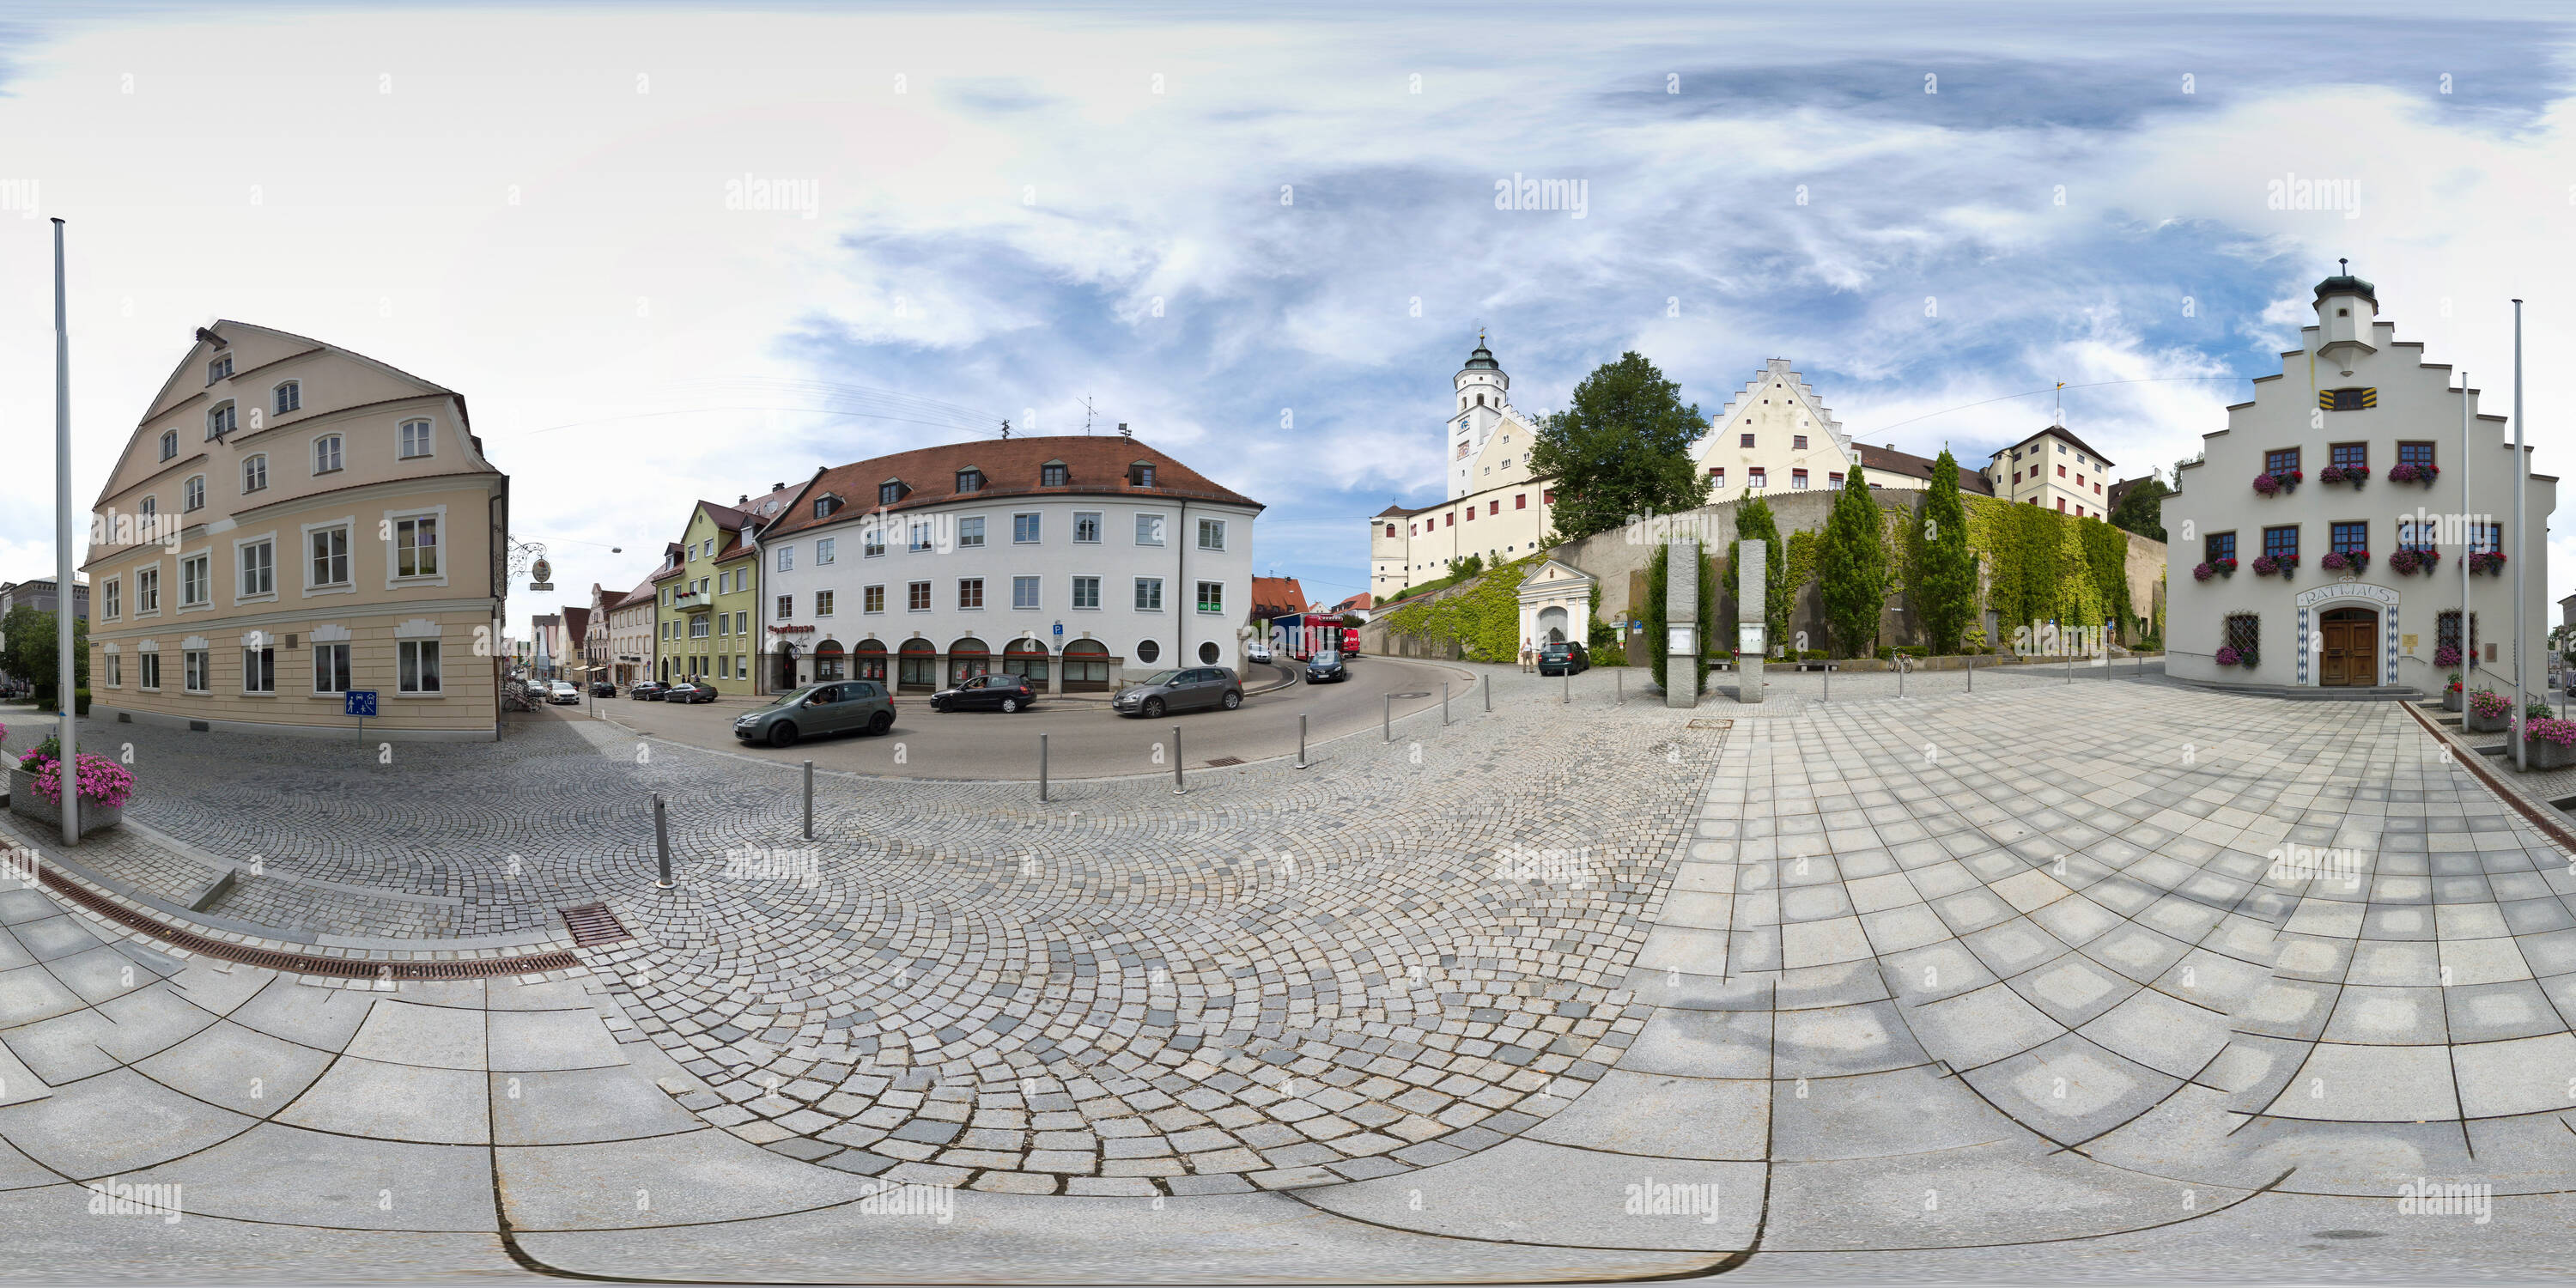 360 degree panoramic view of Town Hall, Fugger Castle and St Andreas Church, Babenhausen, 2017-07